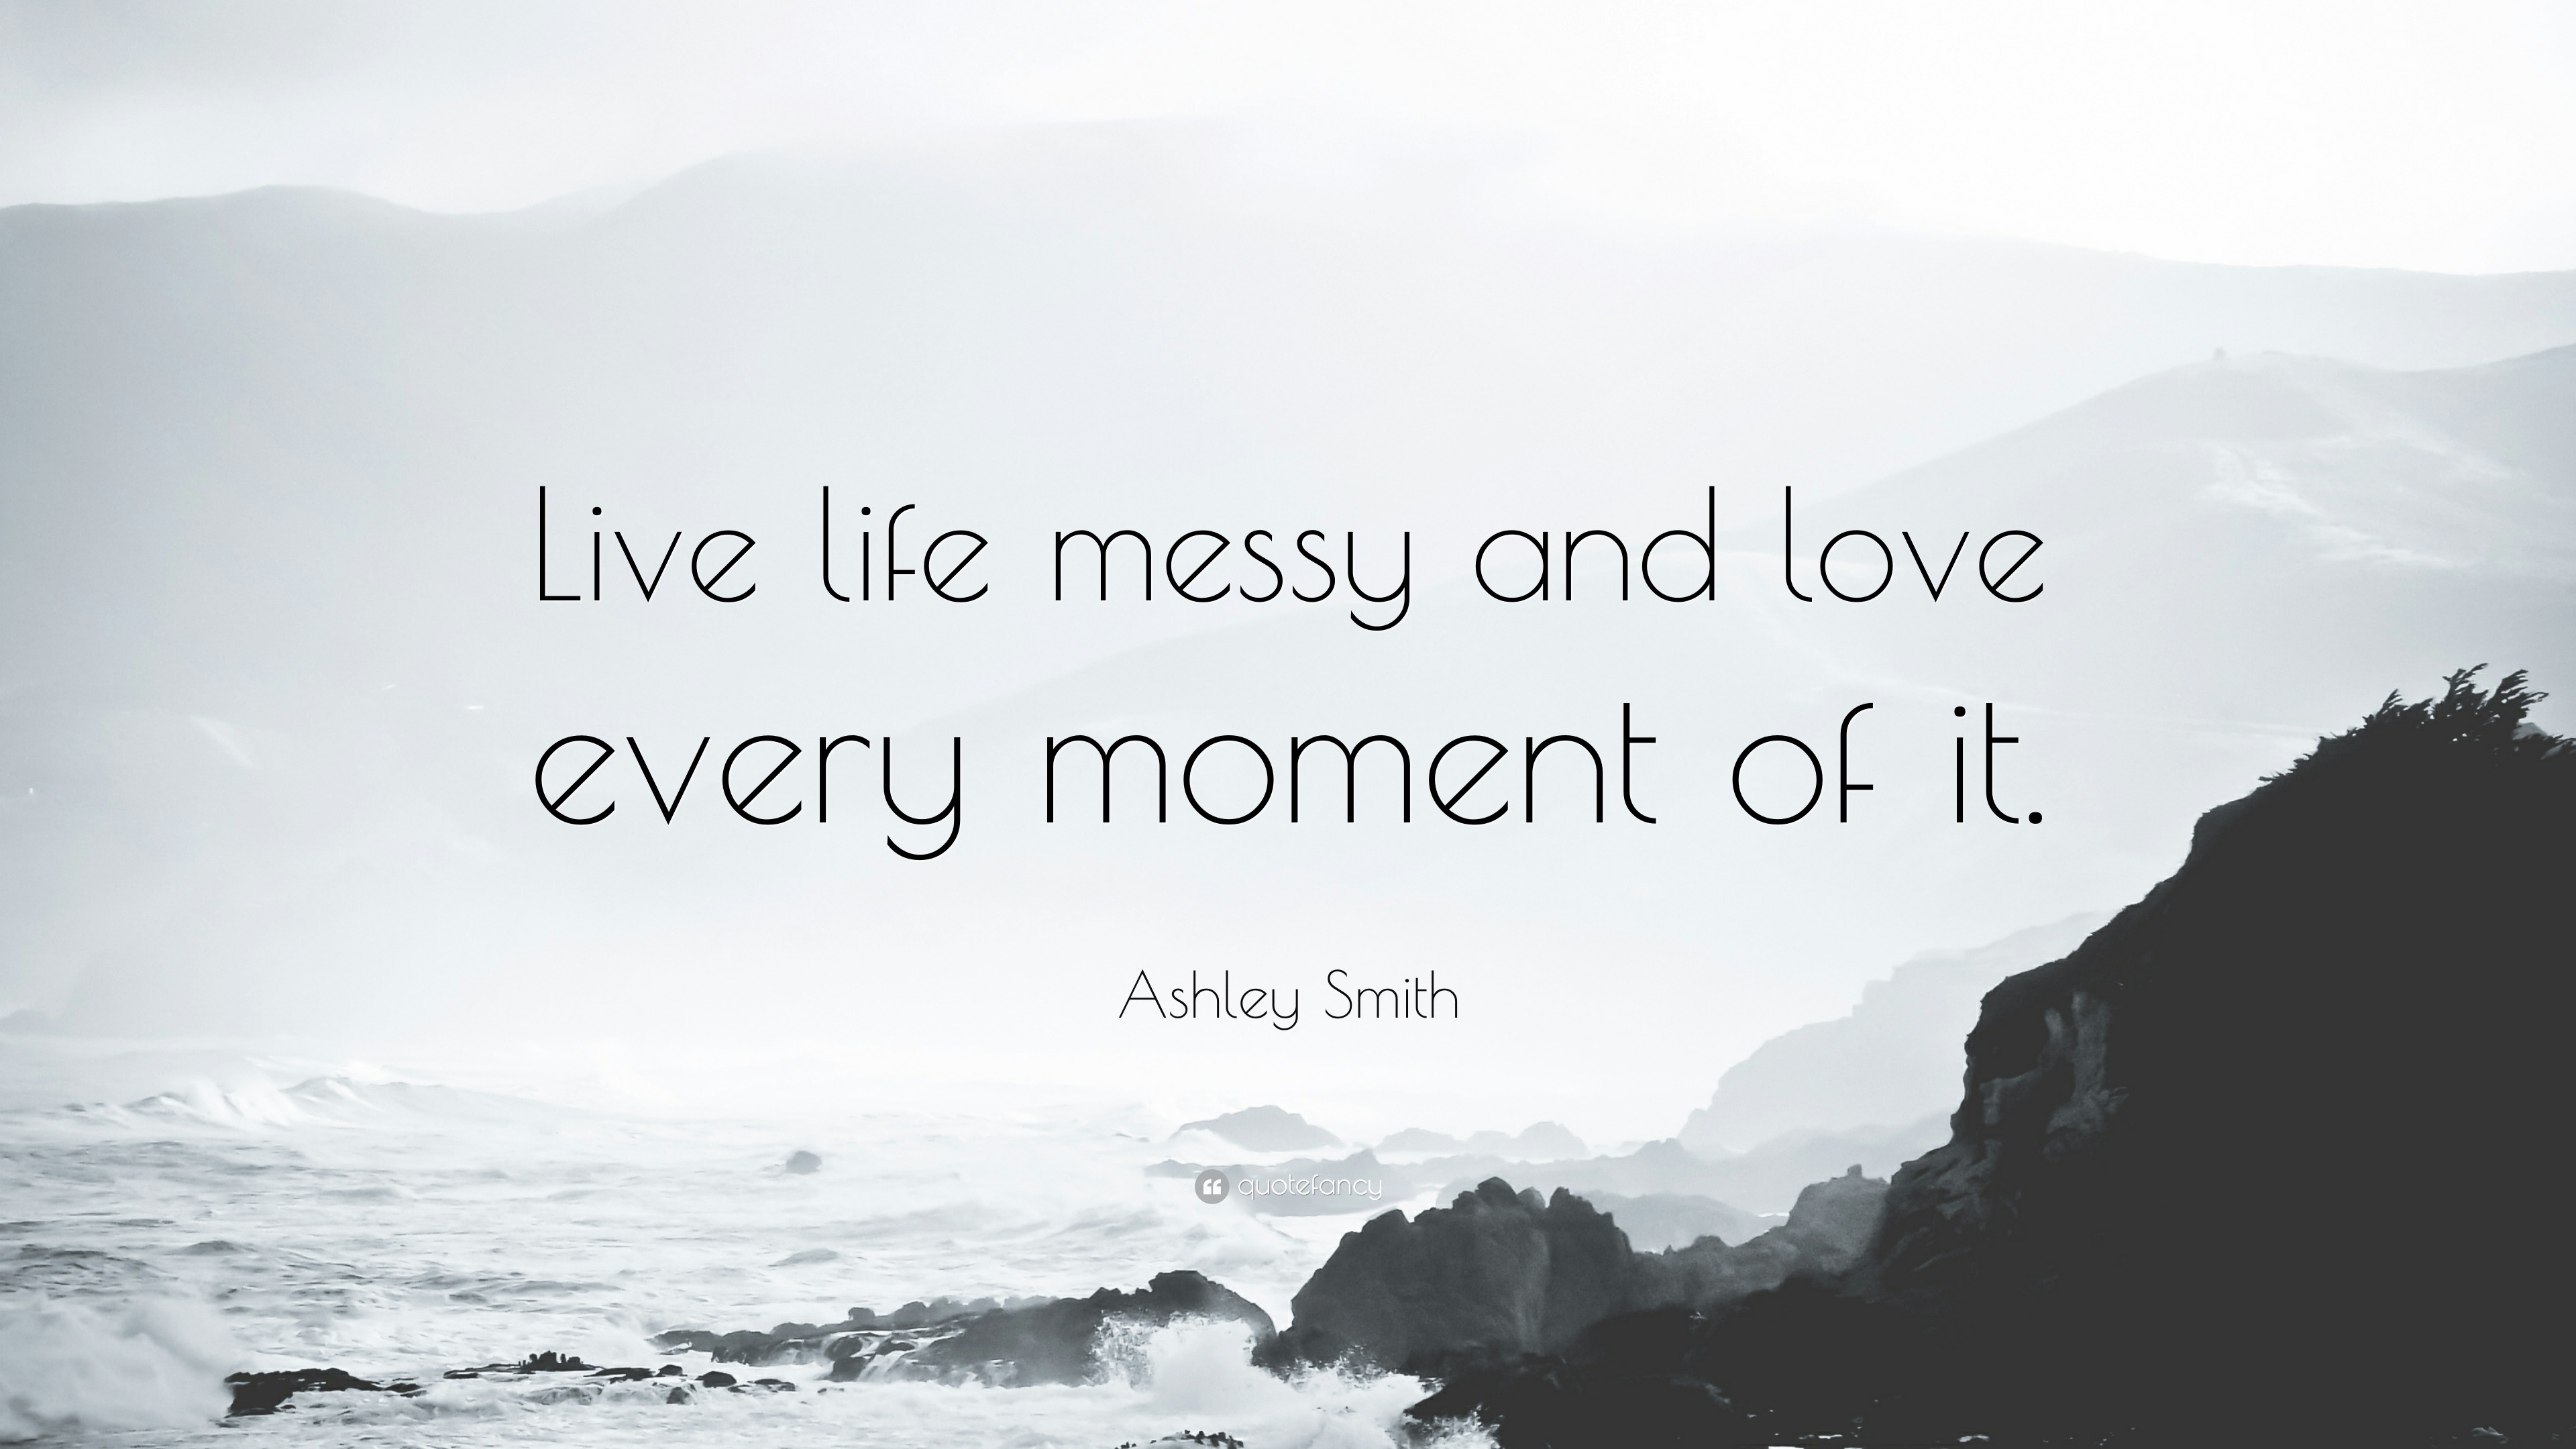 Ashley Smith Quote: “Live life messy and love every moment of it.”